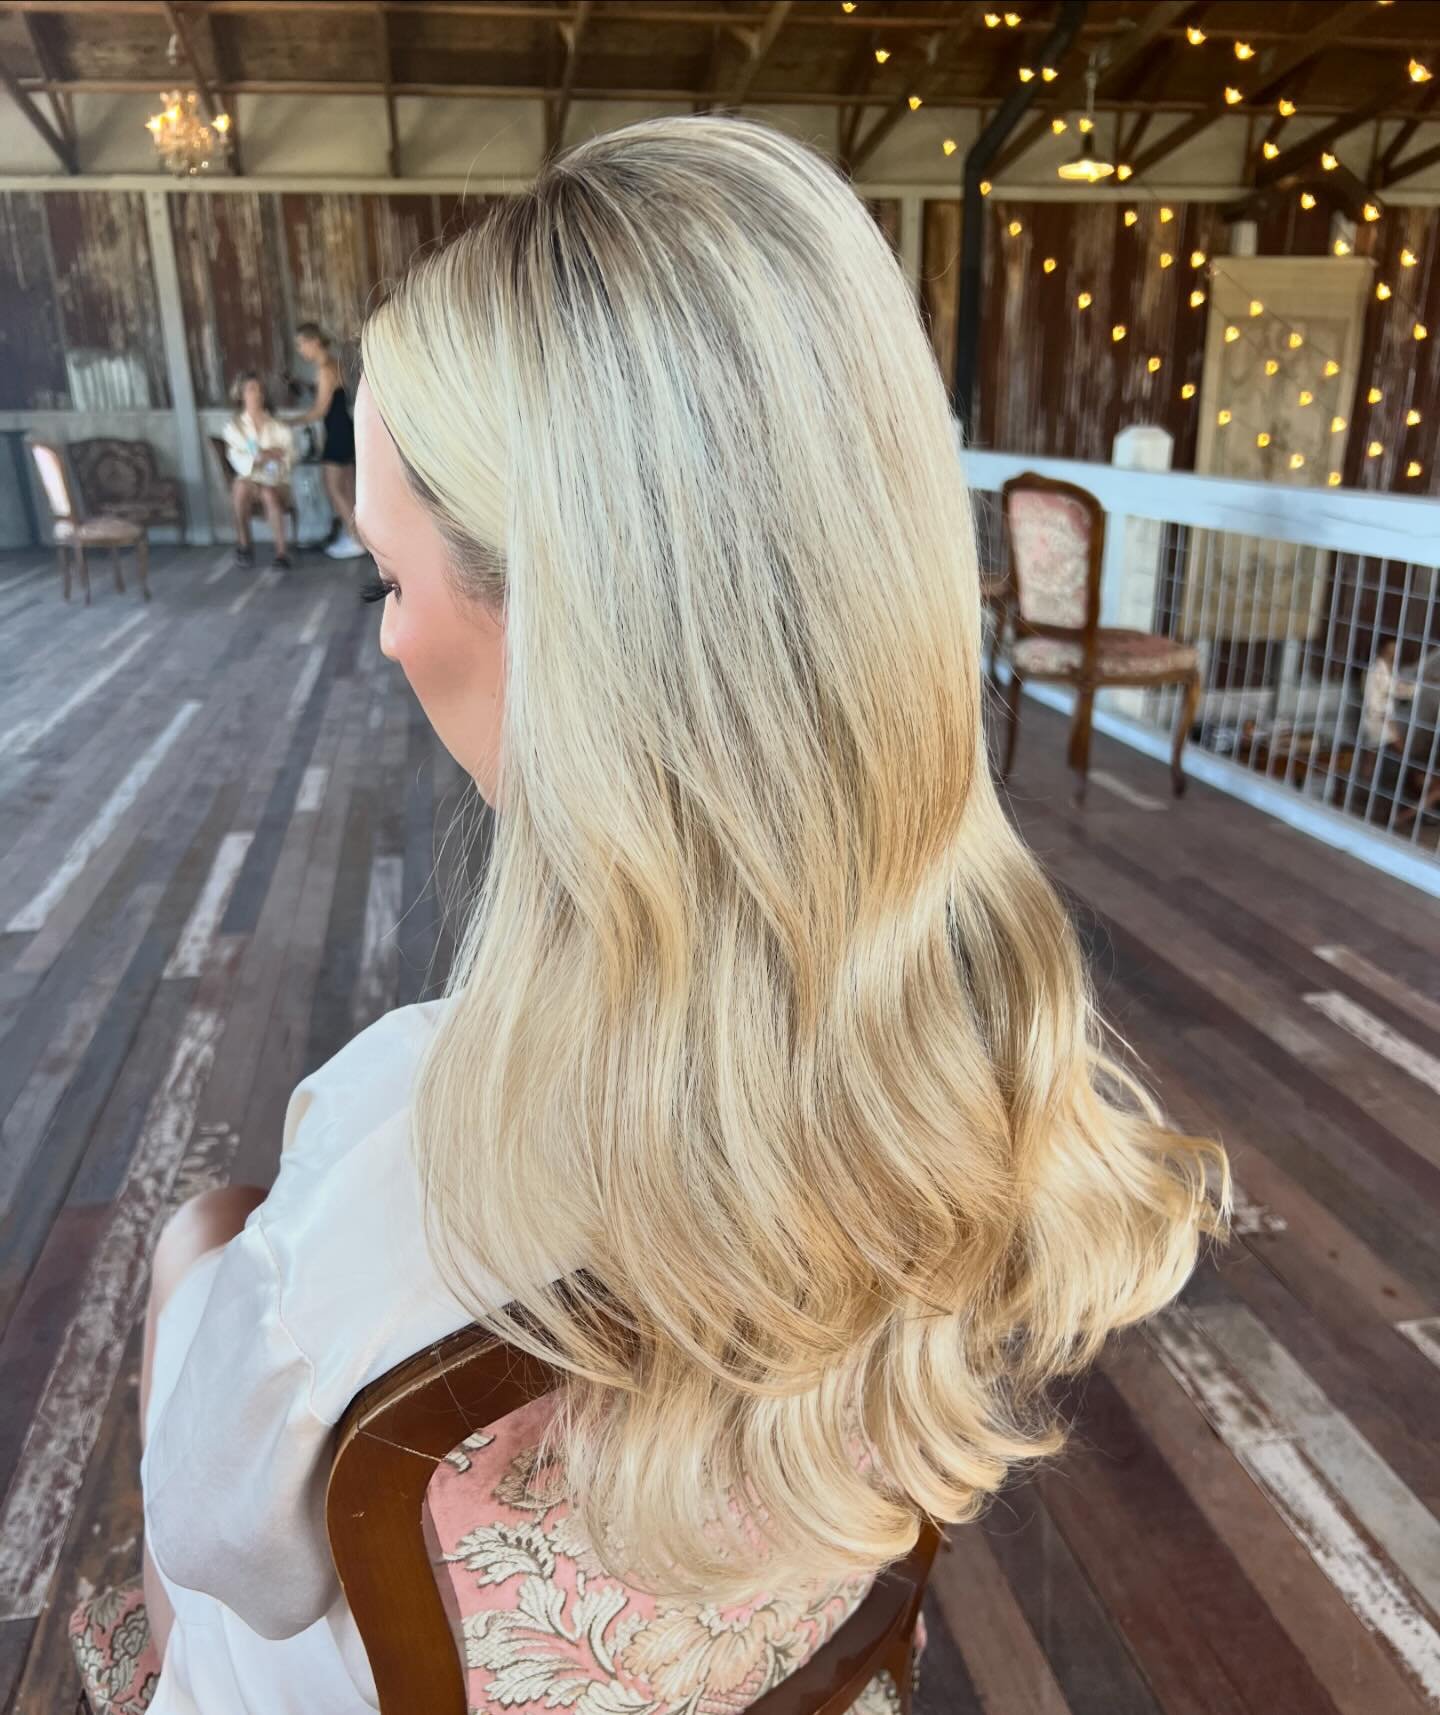 Curled down style with facial framing tucked behind the ears. Perfect for the modern bride who wants a soft bridal hairstyle that is effortless with fuller curls with a less structured curl but polished feel. Curls like this were achieved with a 1.25